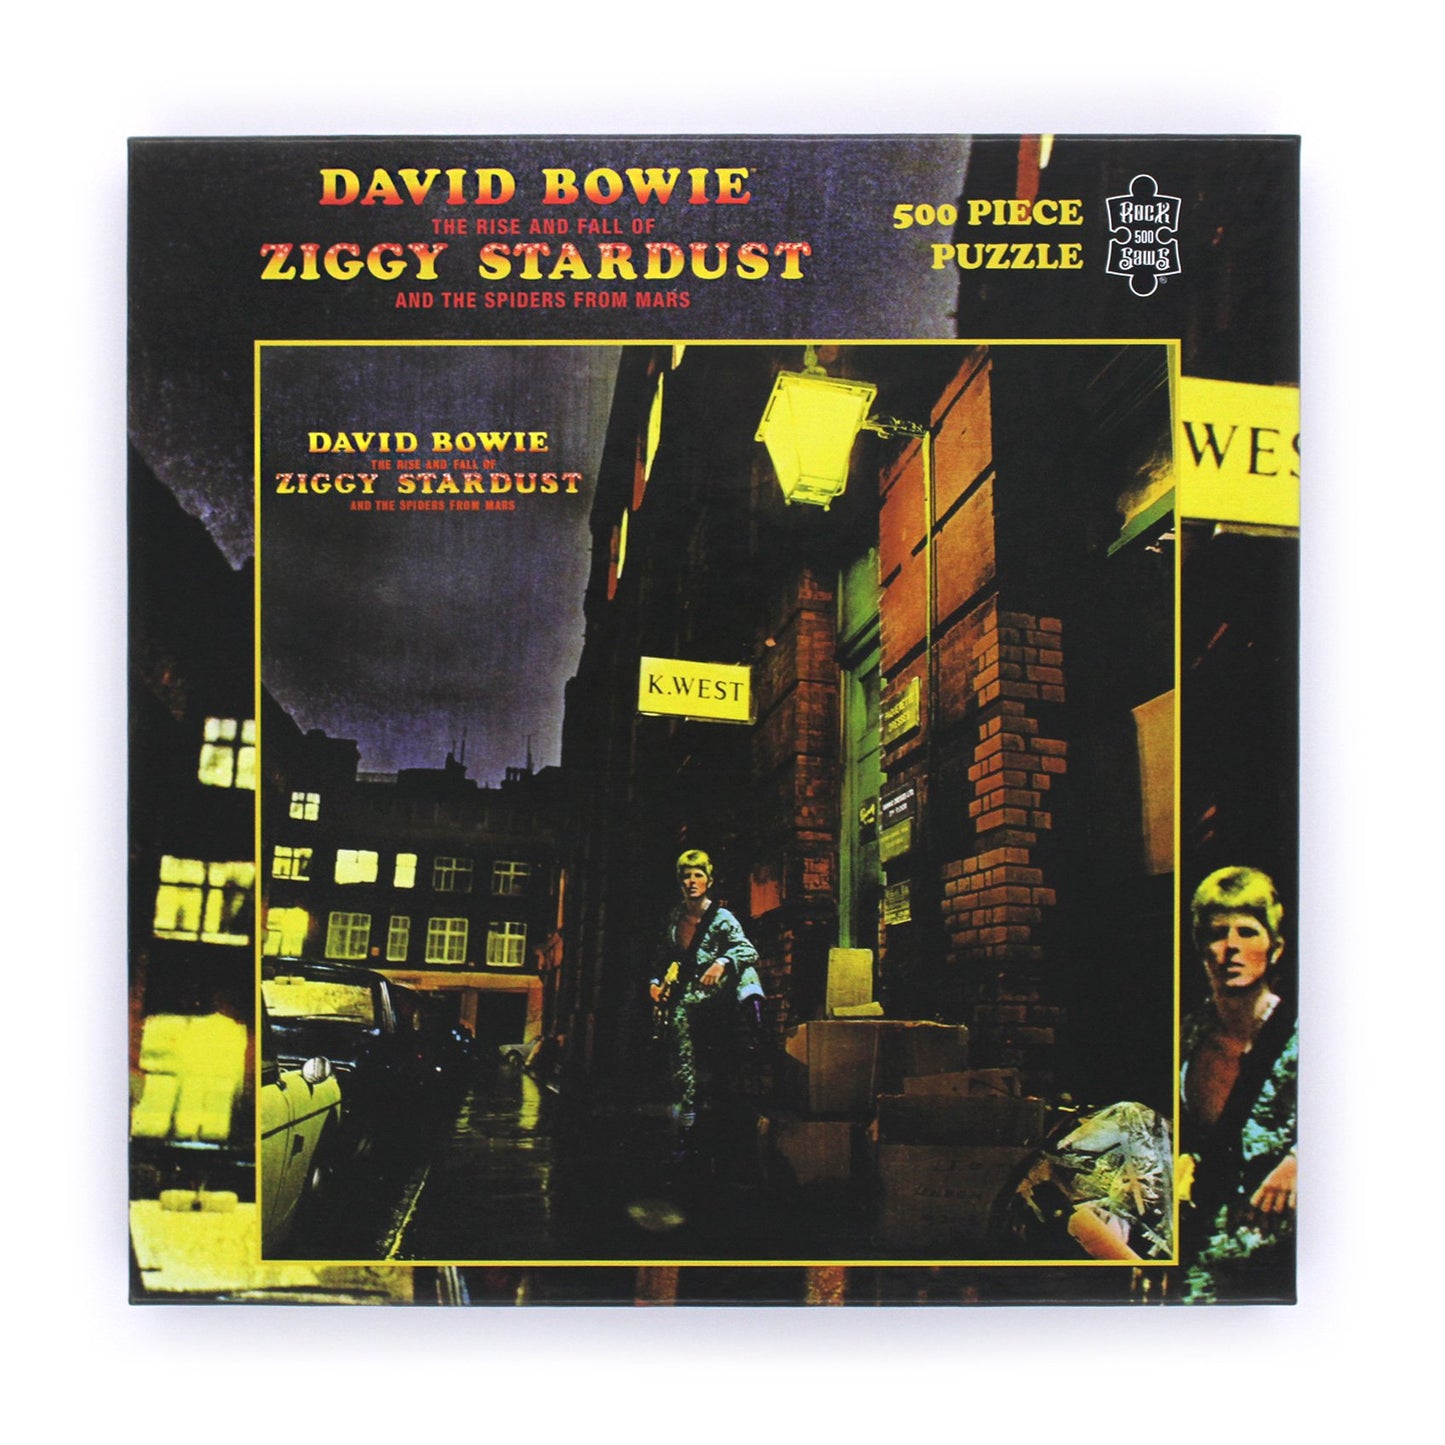 THE RISE AND FALL OF ZIGGY STARDUST AND THE SPIDERS FROM MARS, 500 Piece Puzzle